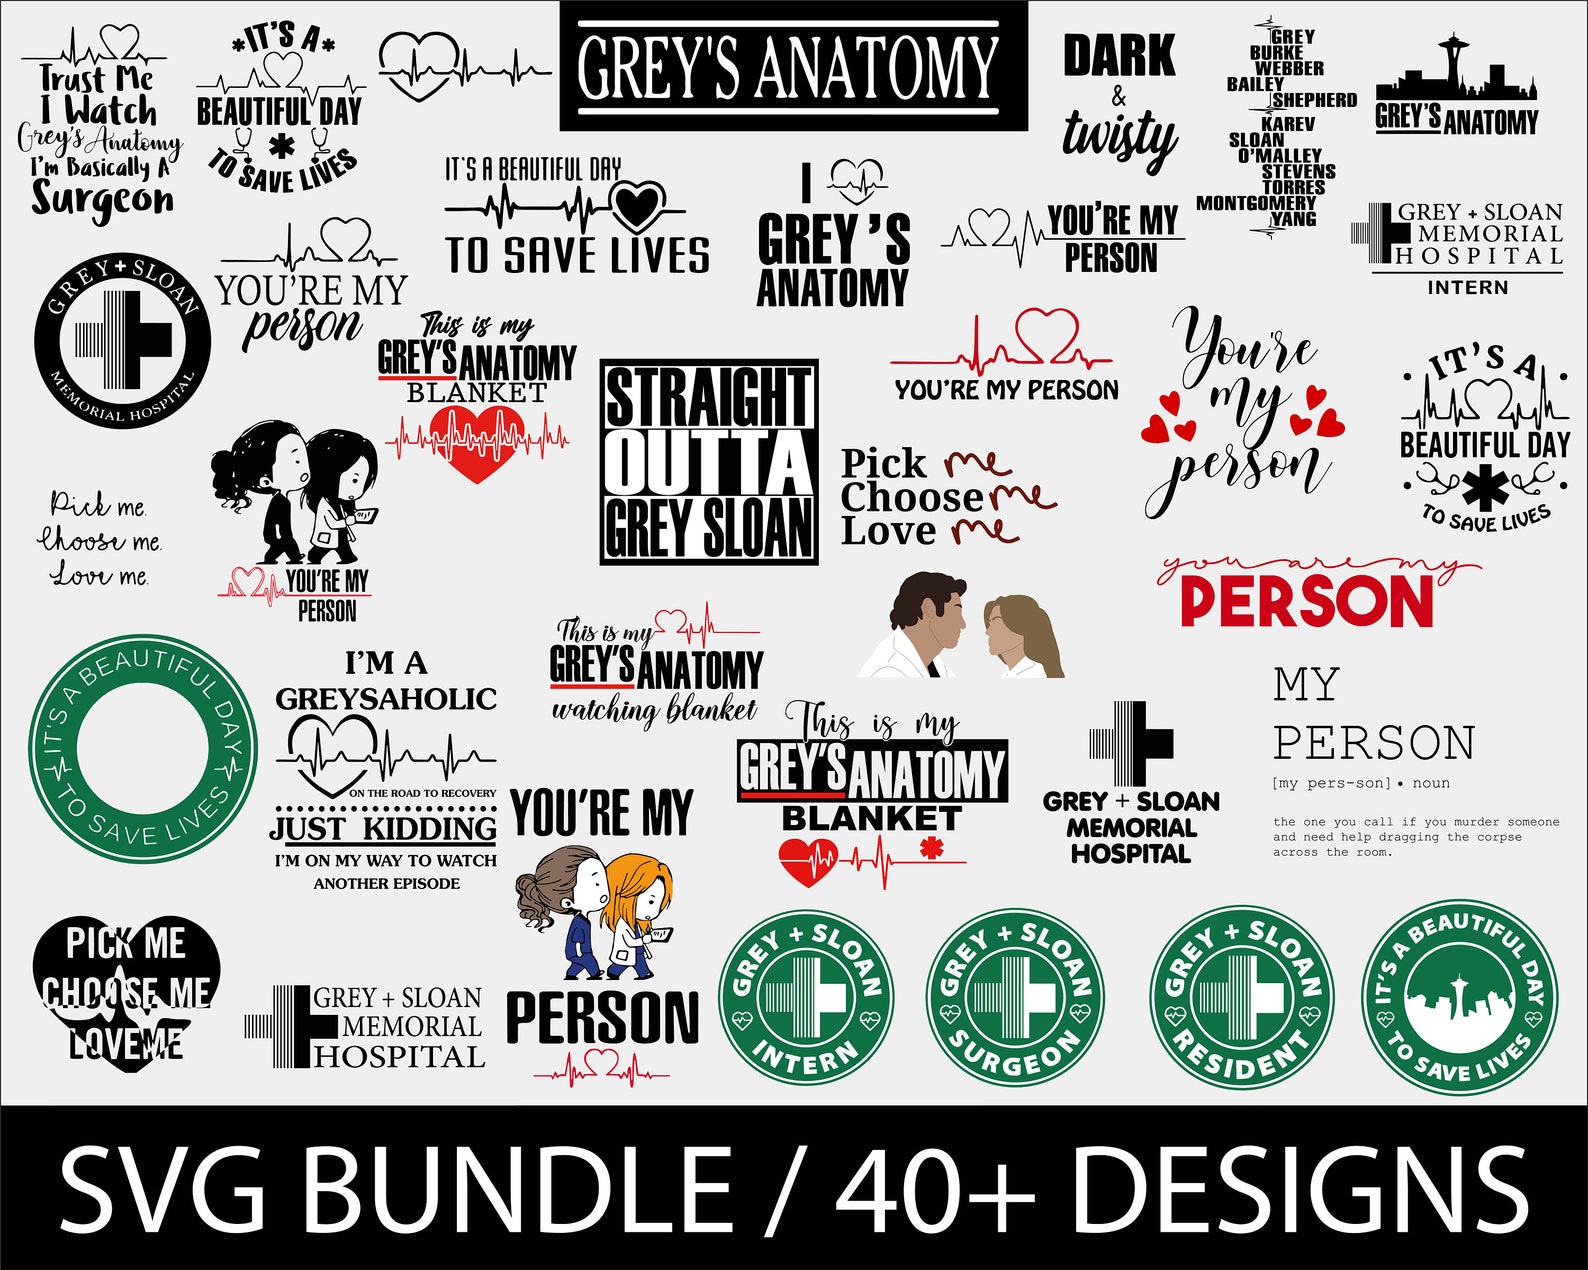 Grey's anatomy collection.